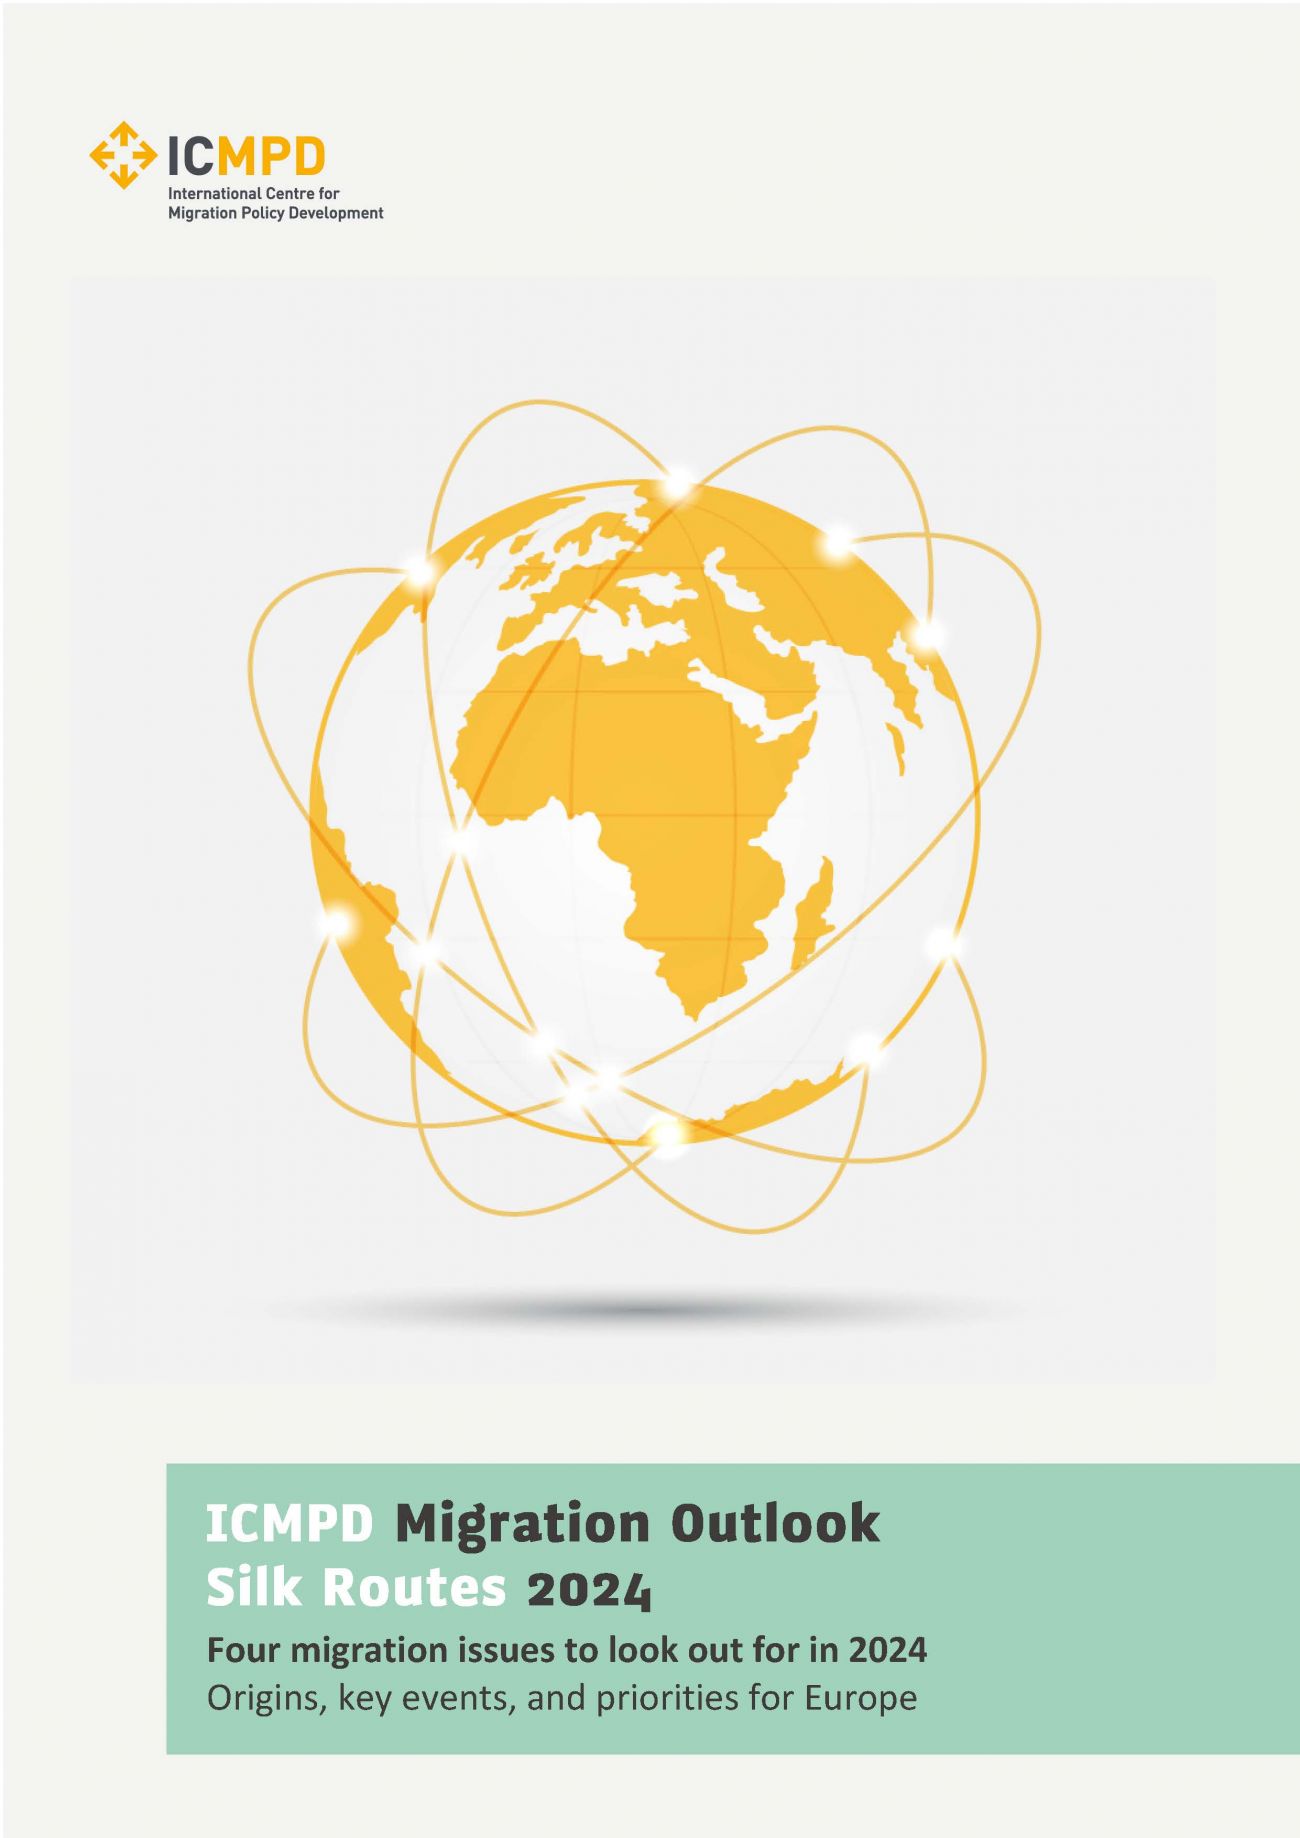 ICMPD_Silk Routes_Migration Outlook 2024.jpg